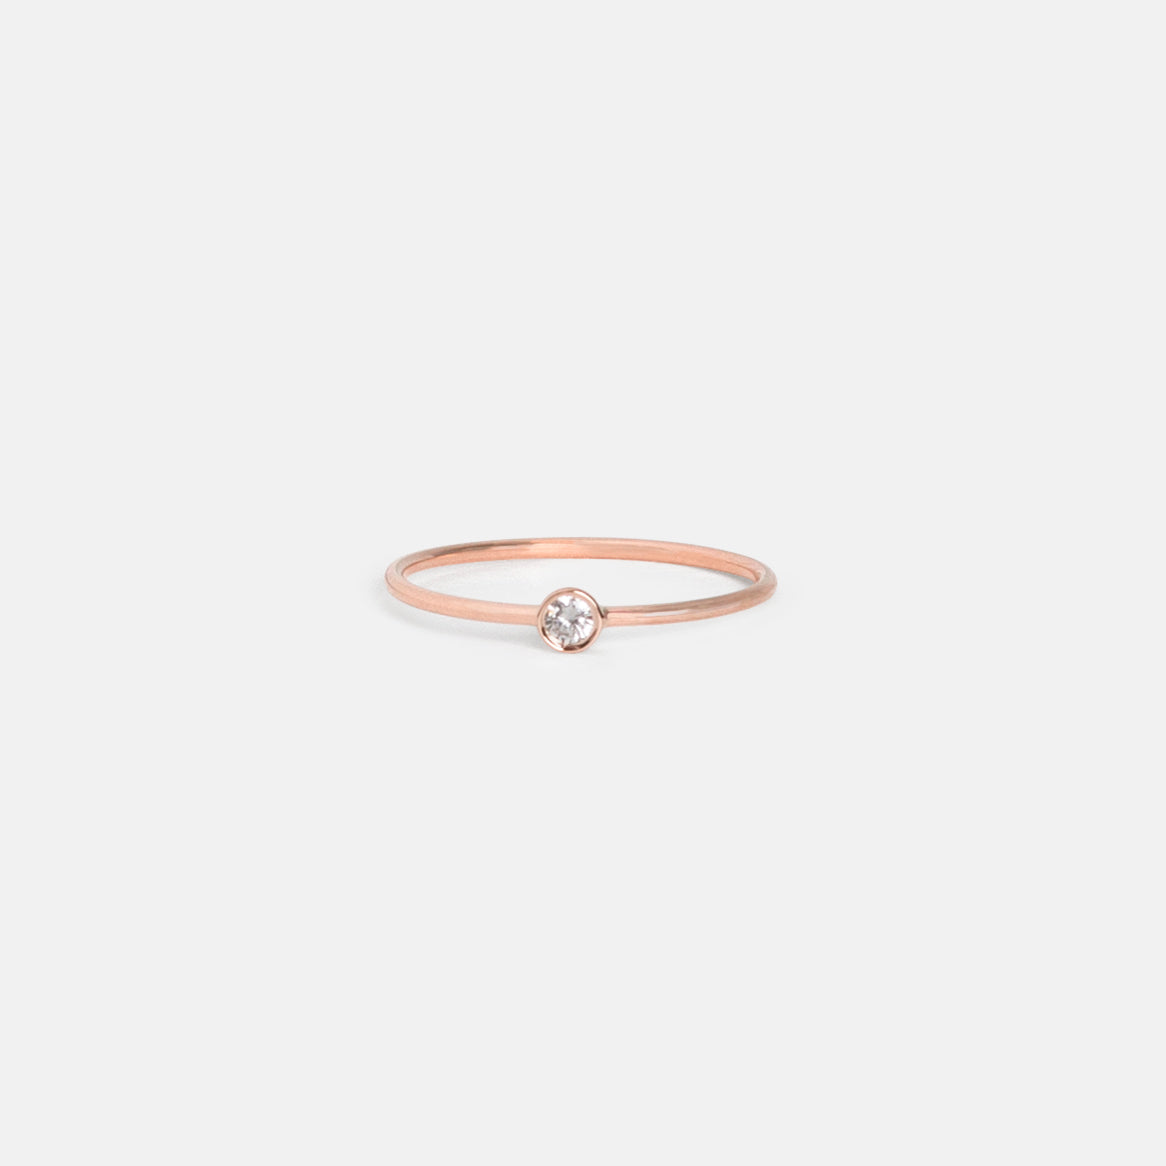 Precious Large Kaya Ring in 14k Rose Gold set with White Diamond by SHW Fine Jewelry in NYC